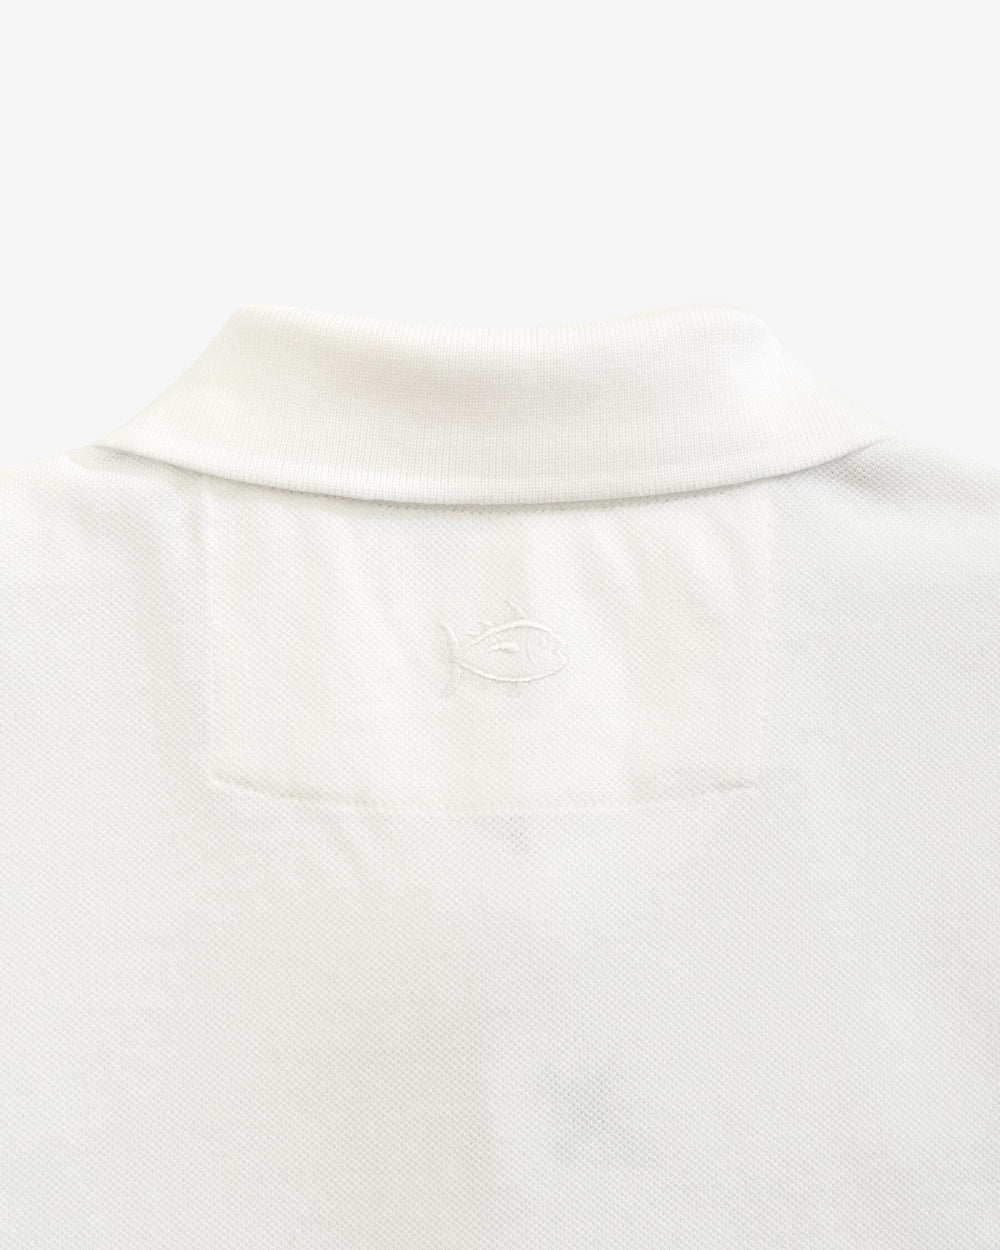 The yoke view of the South Carolina Gamecocks Skipjack Polo by Southern Tide - Classic White